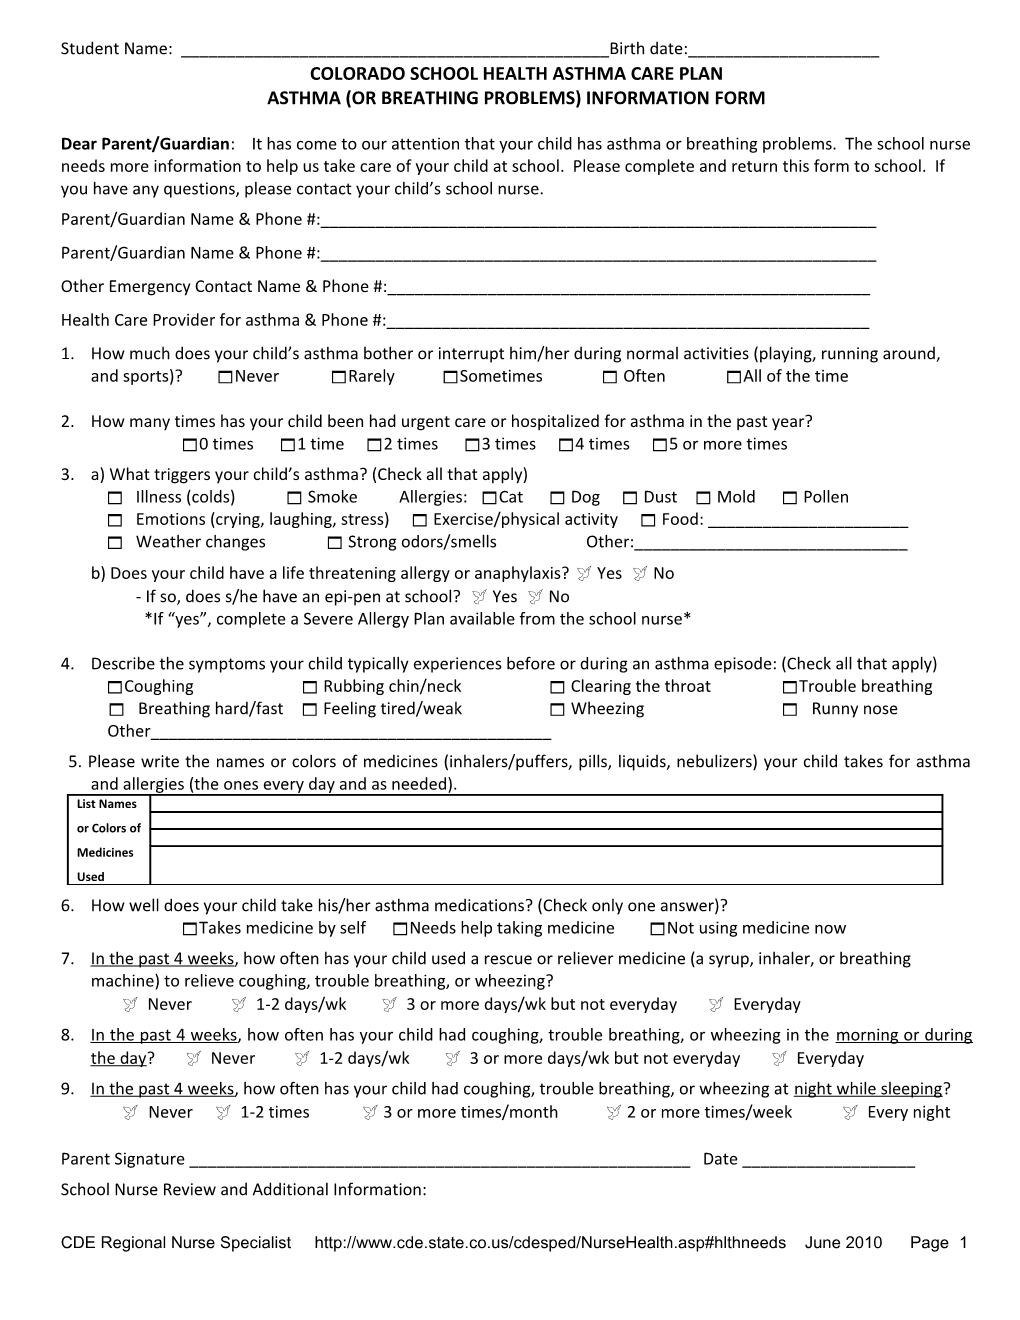 Questionnaire for a Parent of a Student with Asthma Or Breathing Problems